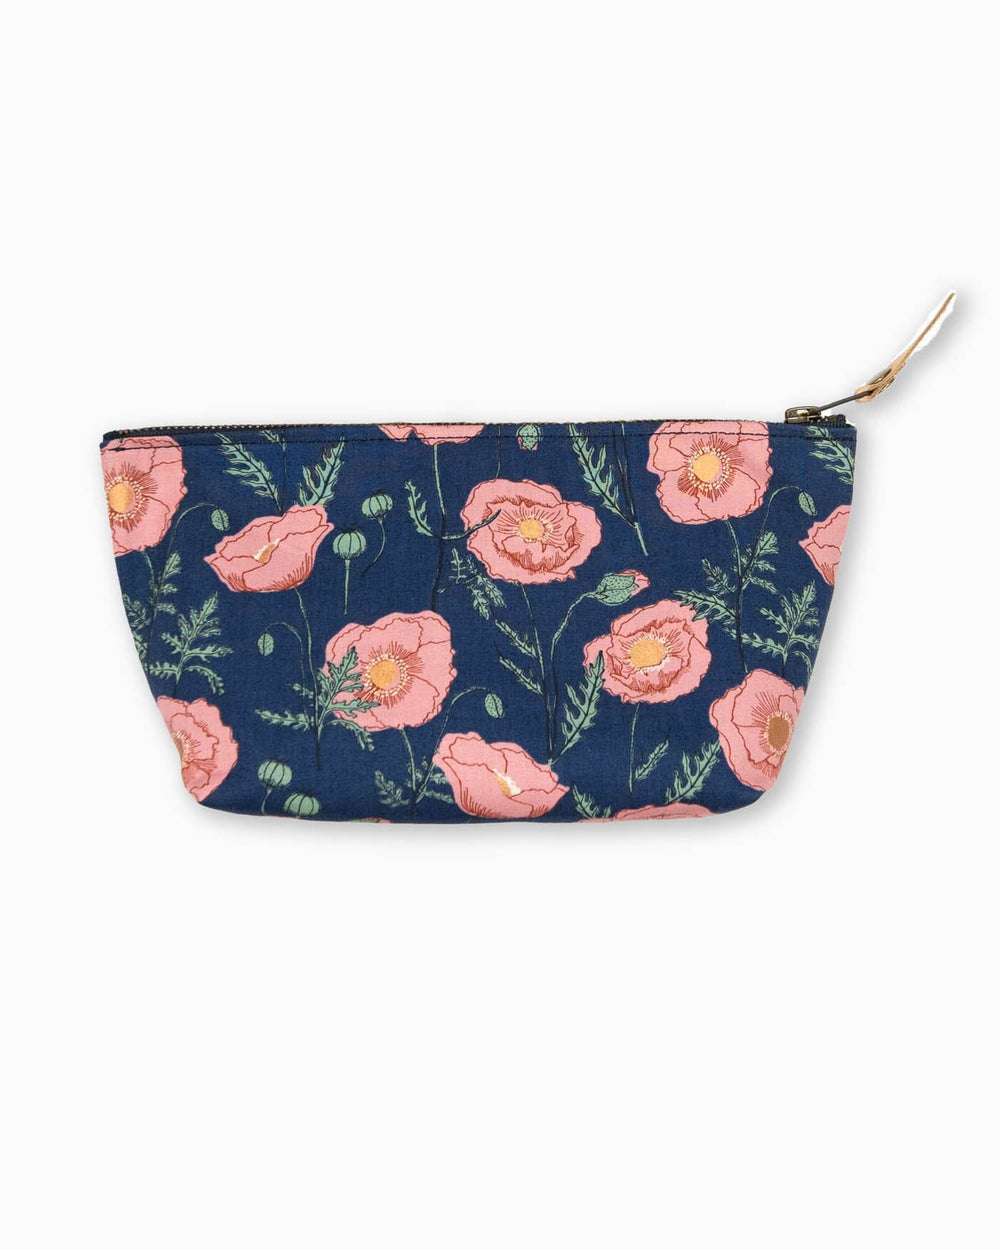 The front view of the Southern Tide Floral Travel Clutch by Southern Tide - Navy